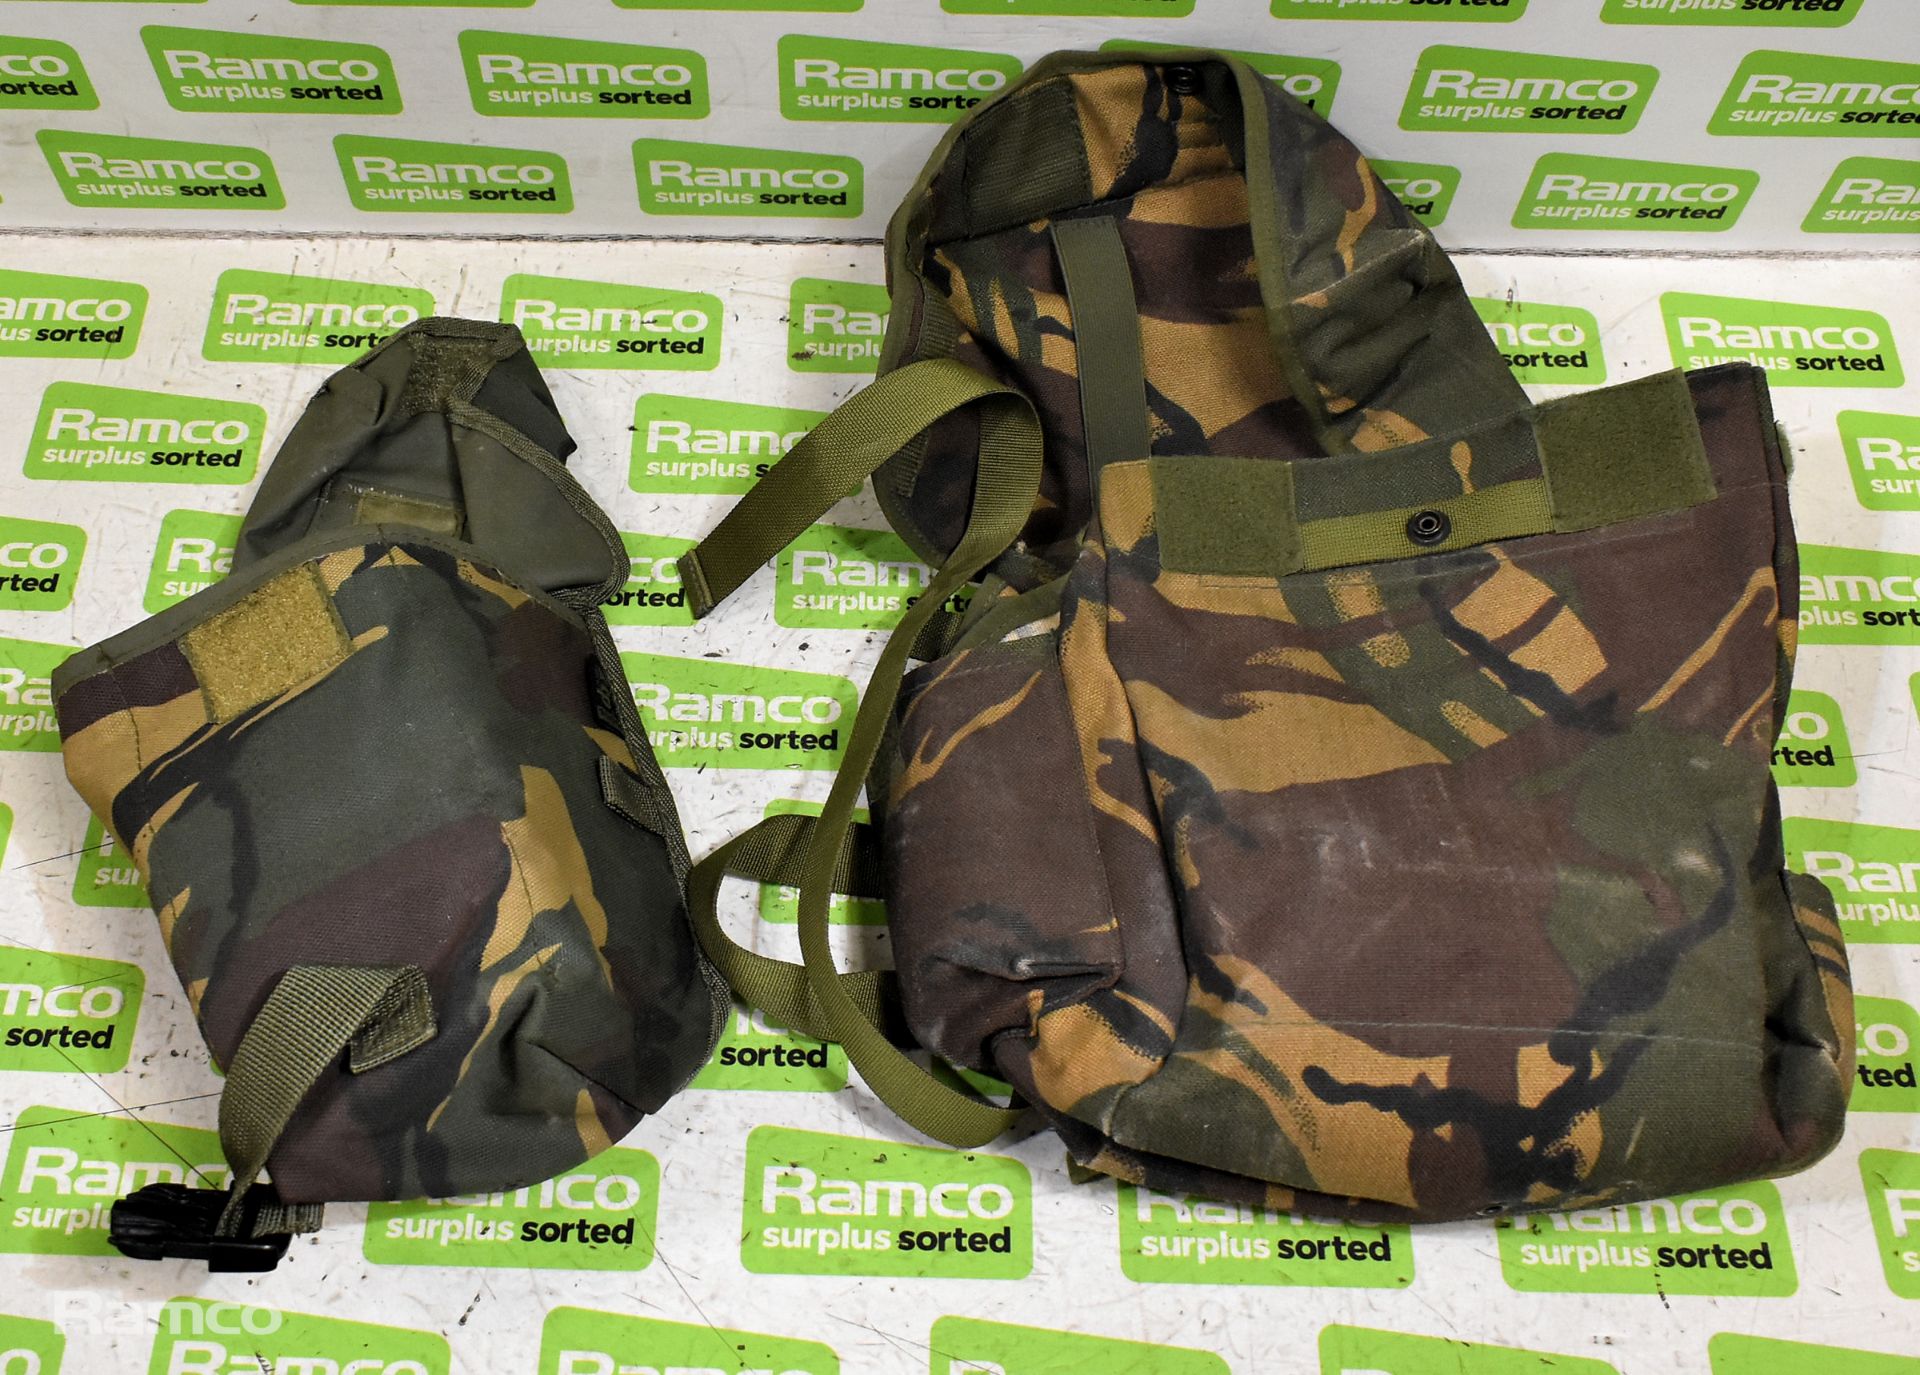 British Army DPM helmet covers, DPM combat hats, DPM cold weather caps, Mixed pouches, DPM hats - Image 10 of 12